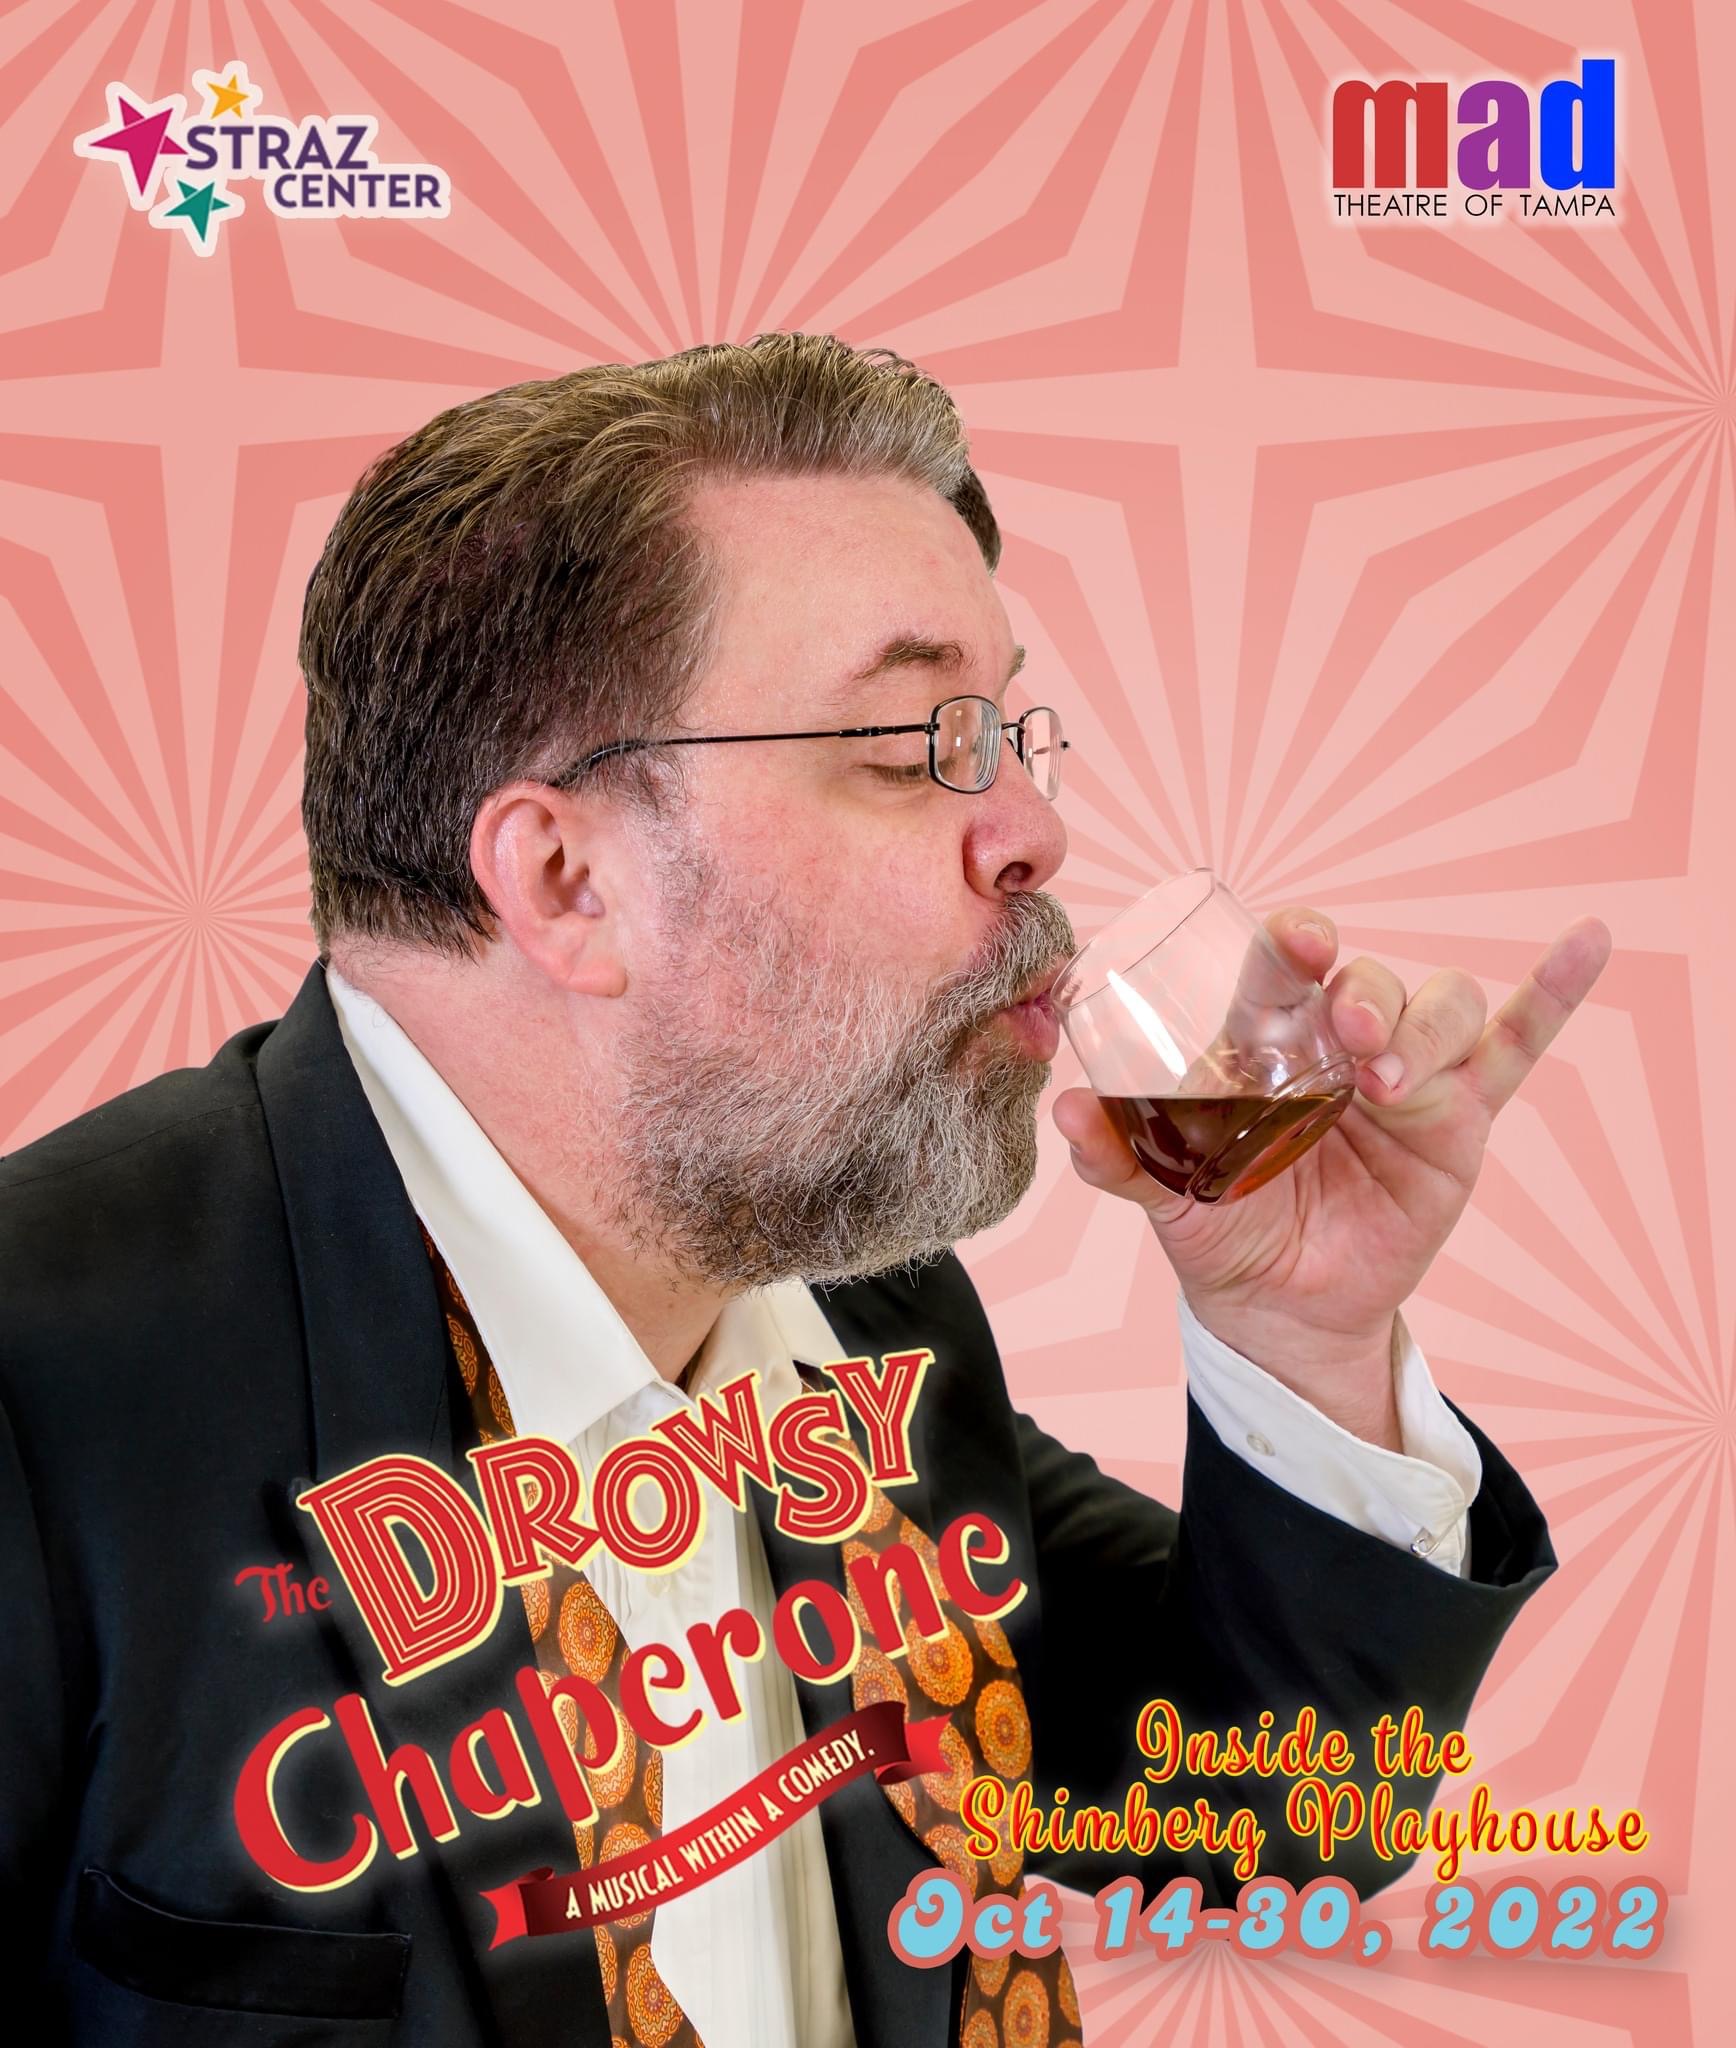 Meet Mr. Feldzieg as played by Jay Morgan in mad Theatre of Tampa’s “The Drowsy Chaperone